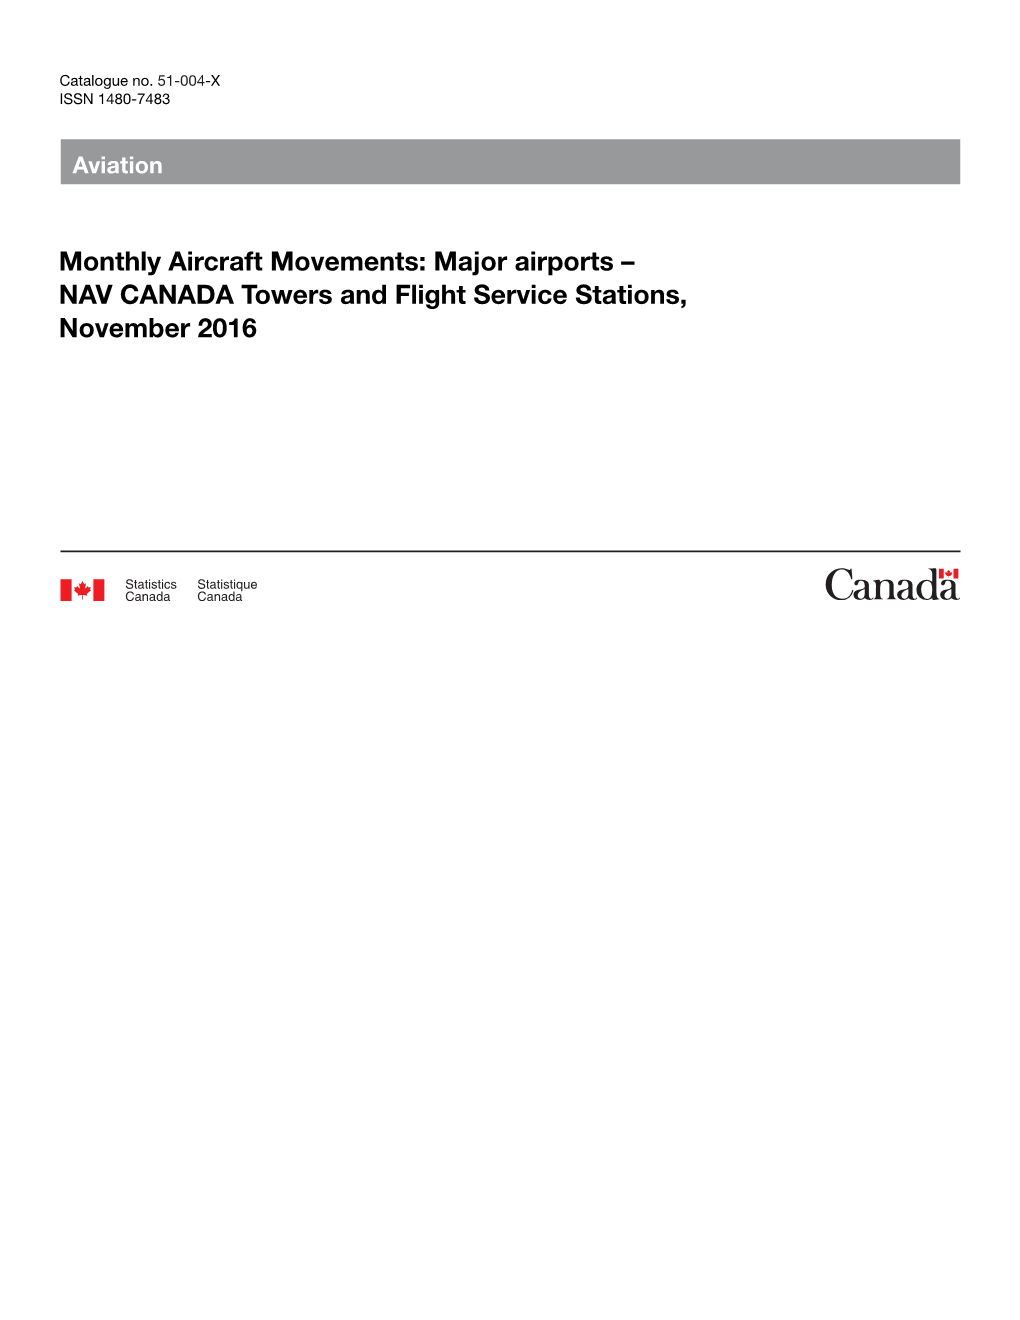 Monthly Aircraft Movements: Major Airports – NAV CANADA Towers and Flight Service Stations, November 2016